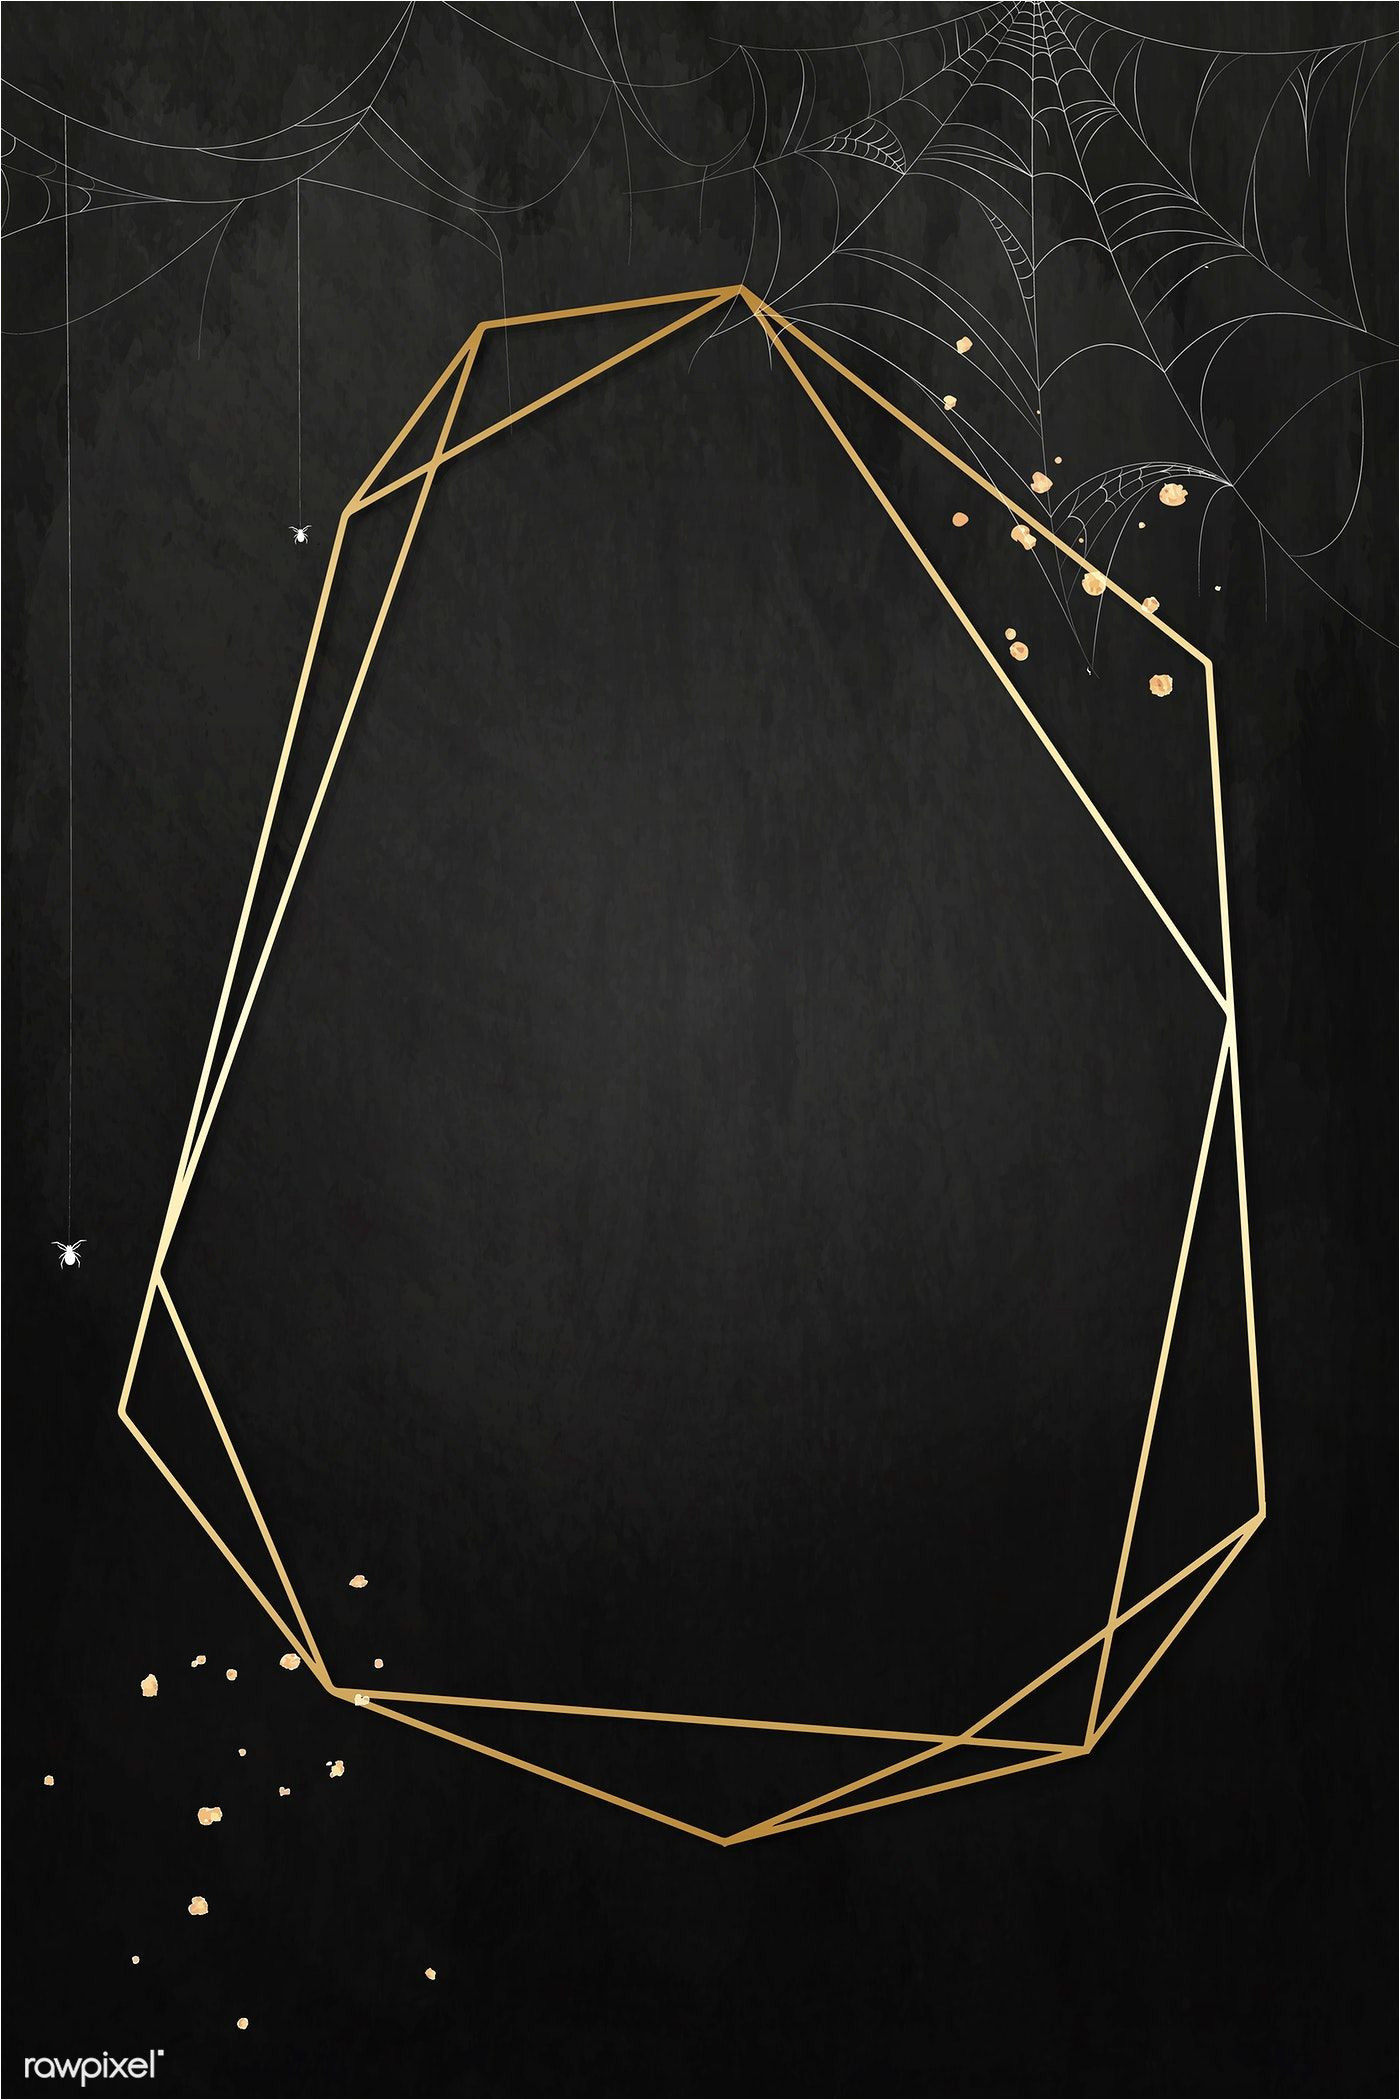 Card View Background is Black Gold Polygon Frame On Spider Web Black Background Vector